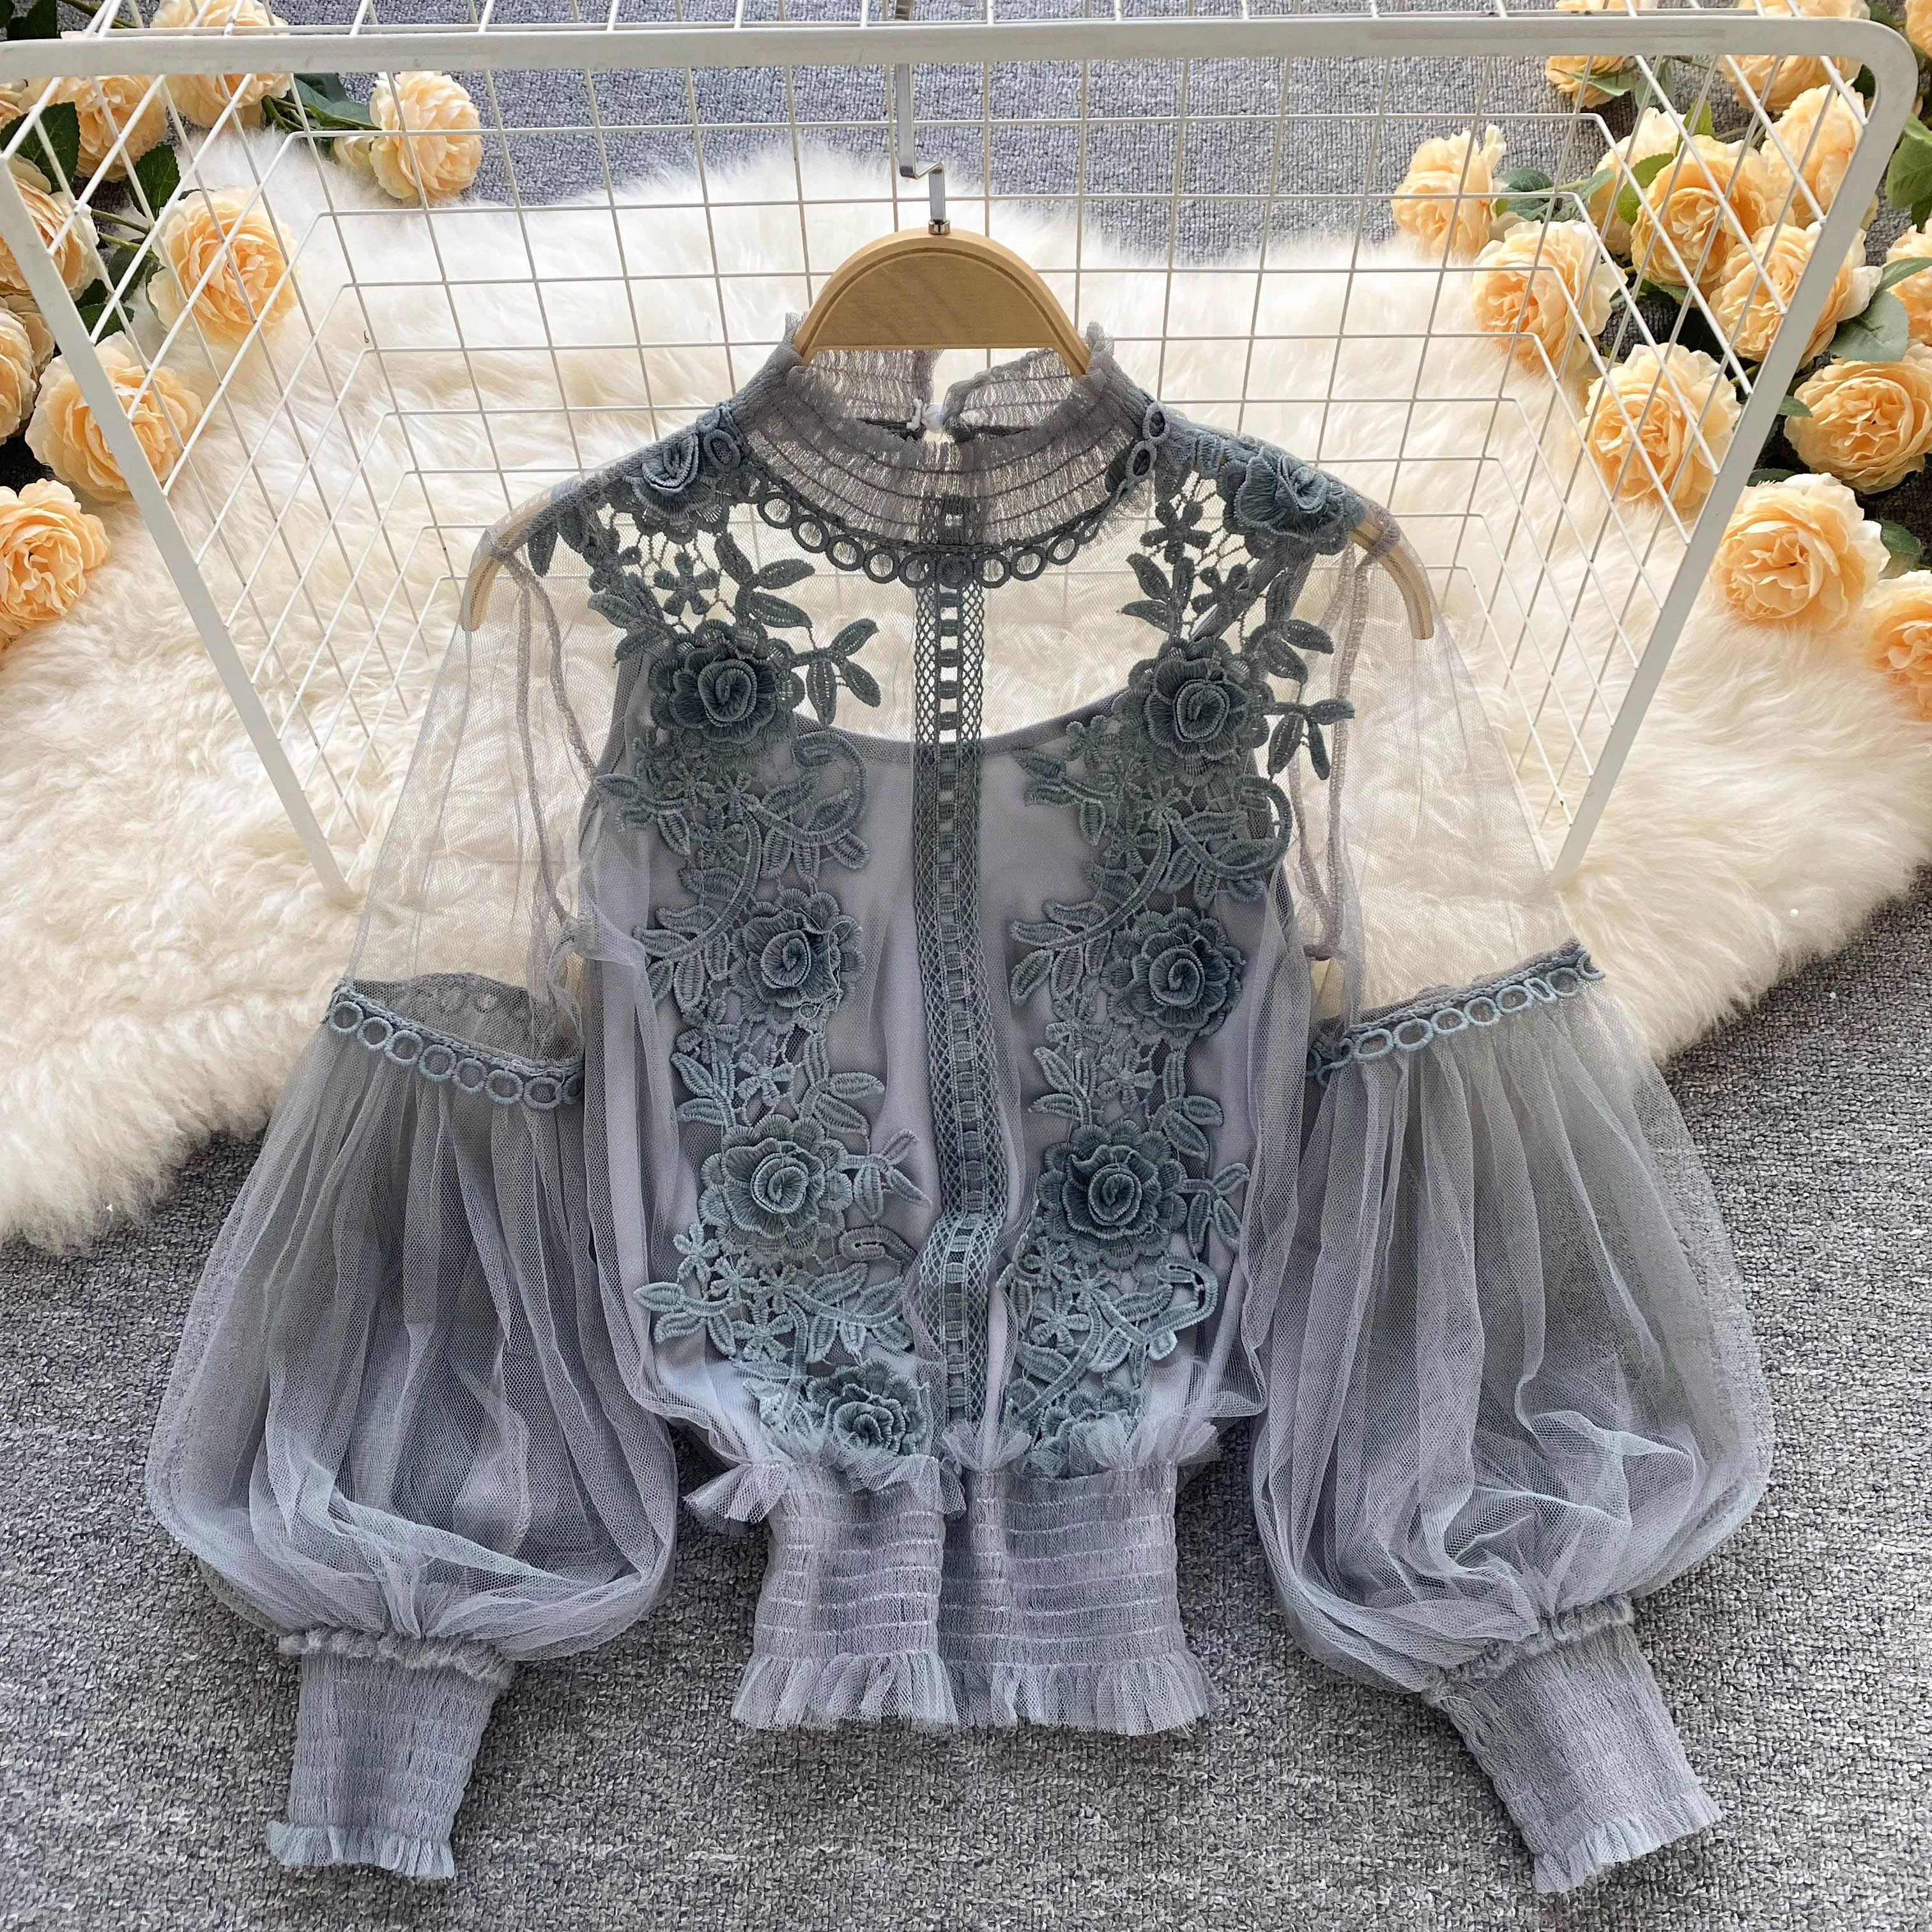 Design three-dimensional flower collage perspective mesh lantern sleeve slim short style tops lace base women blouse